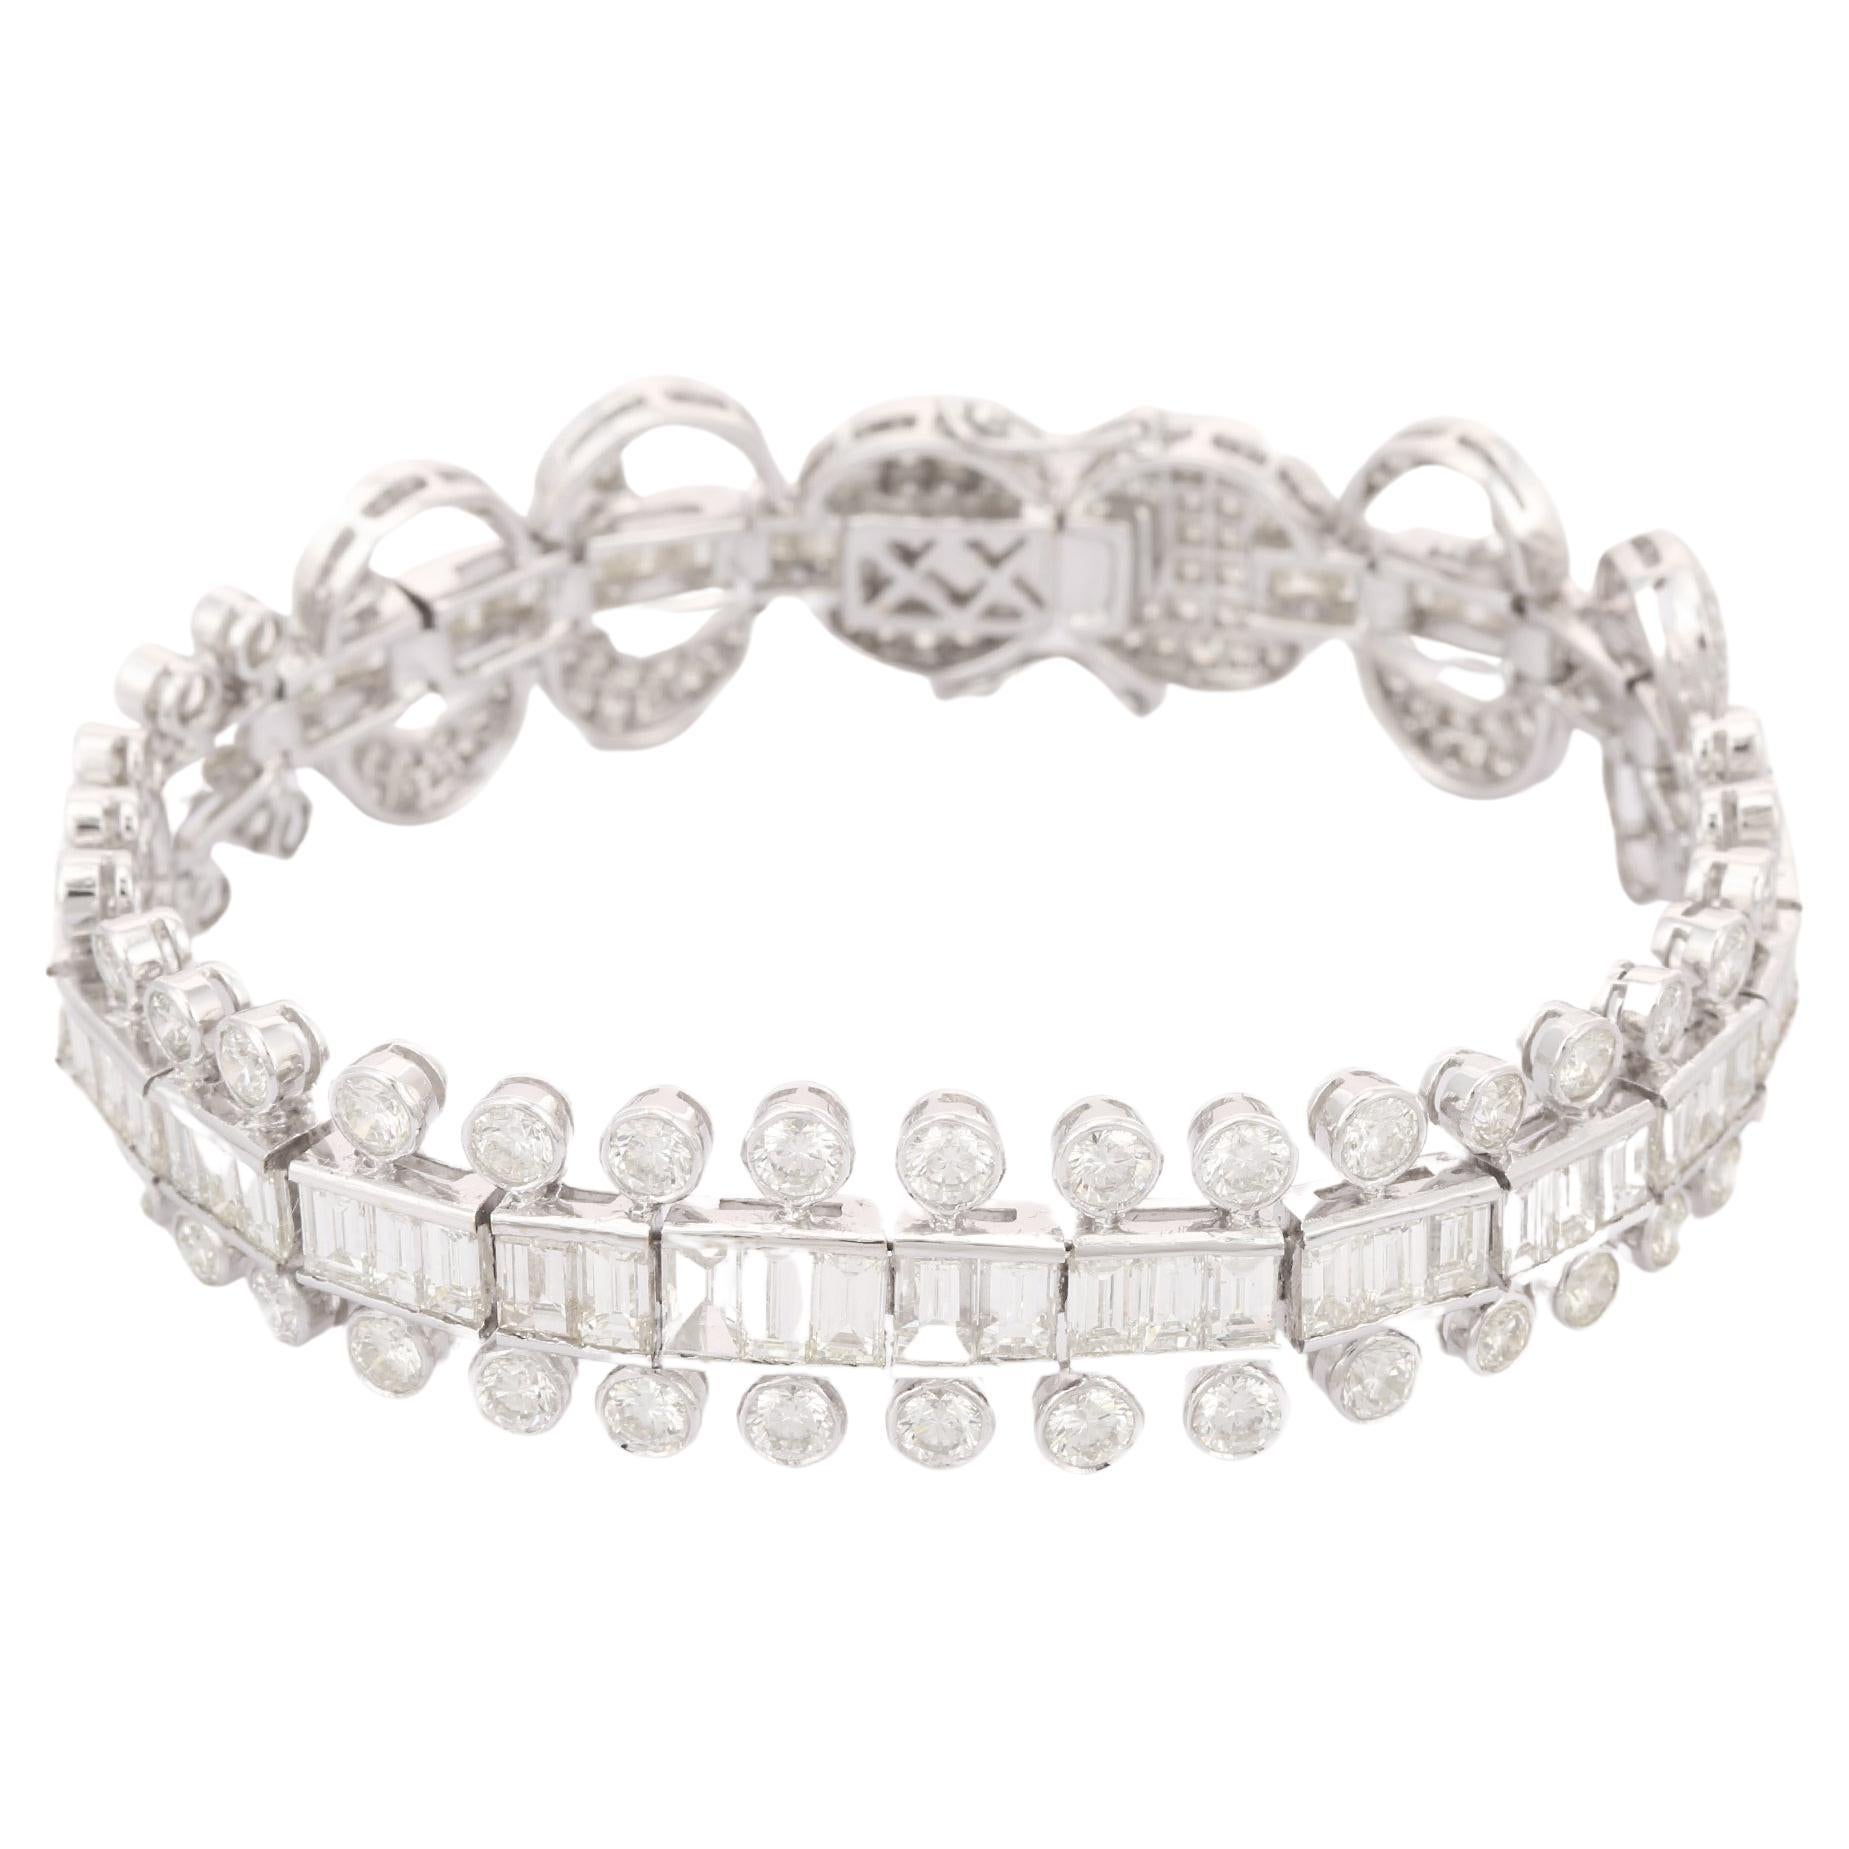 This Timeless 22.66 Carat Diamond Wedding Bracelet in 18K gold showcases sparkling natural diamonds, weighing 22.66 carats. 
April birthstone diamond brings love, fame, success and prosperity.
Designed with diamonds making a bold wedding bracelet to